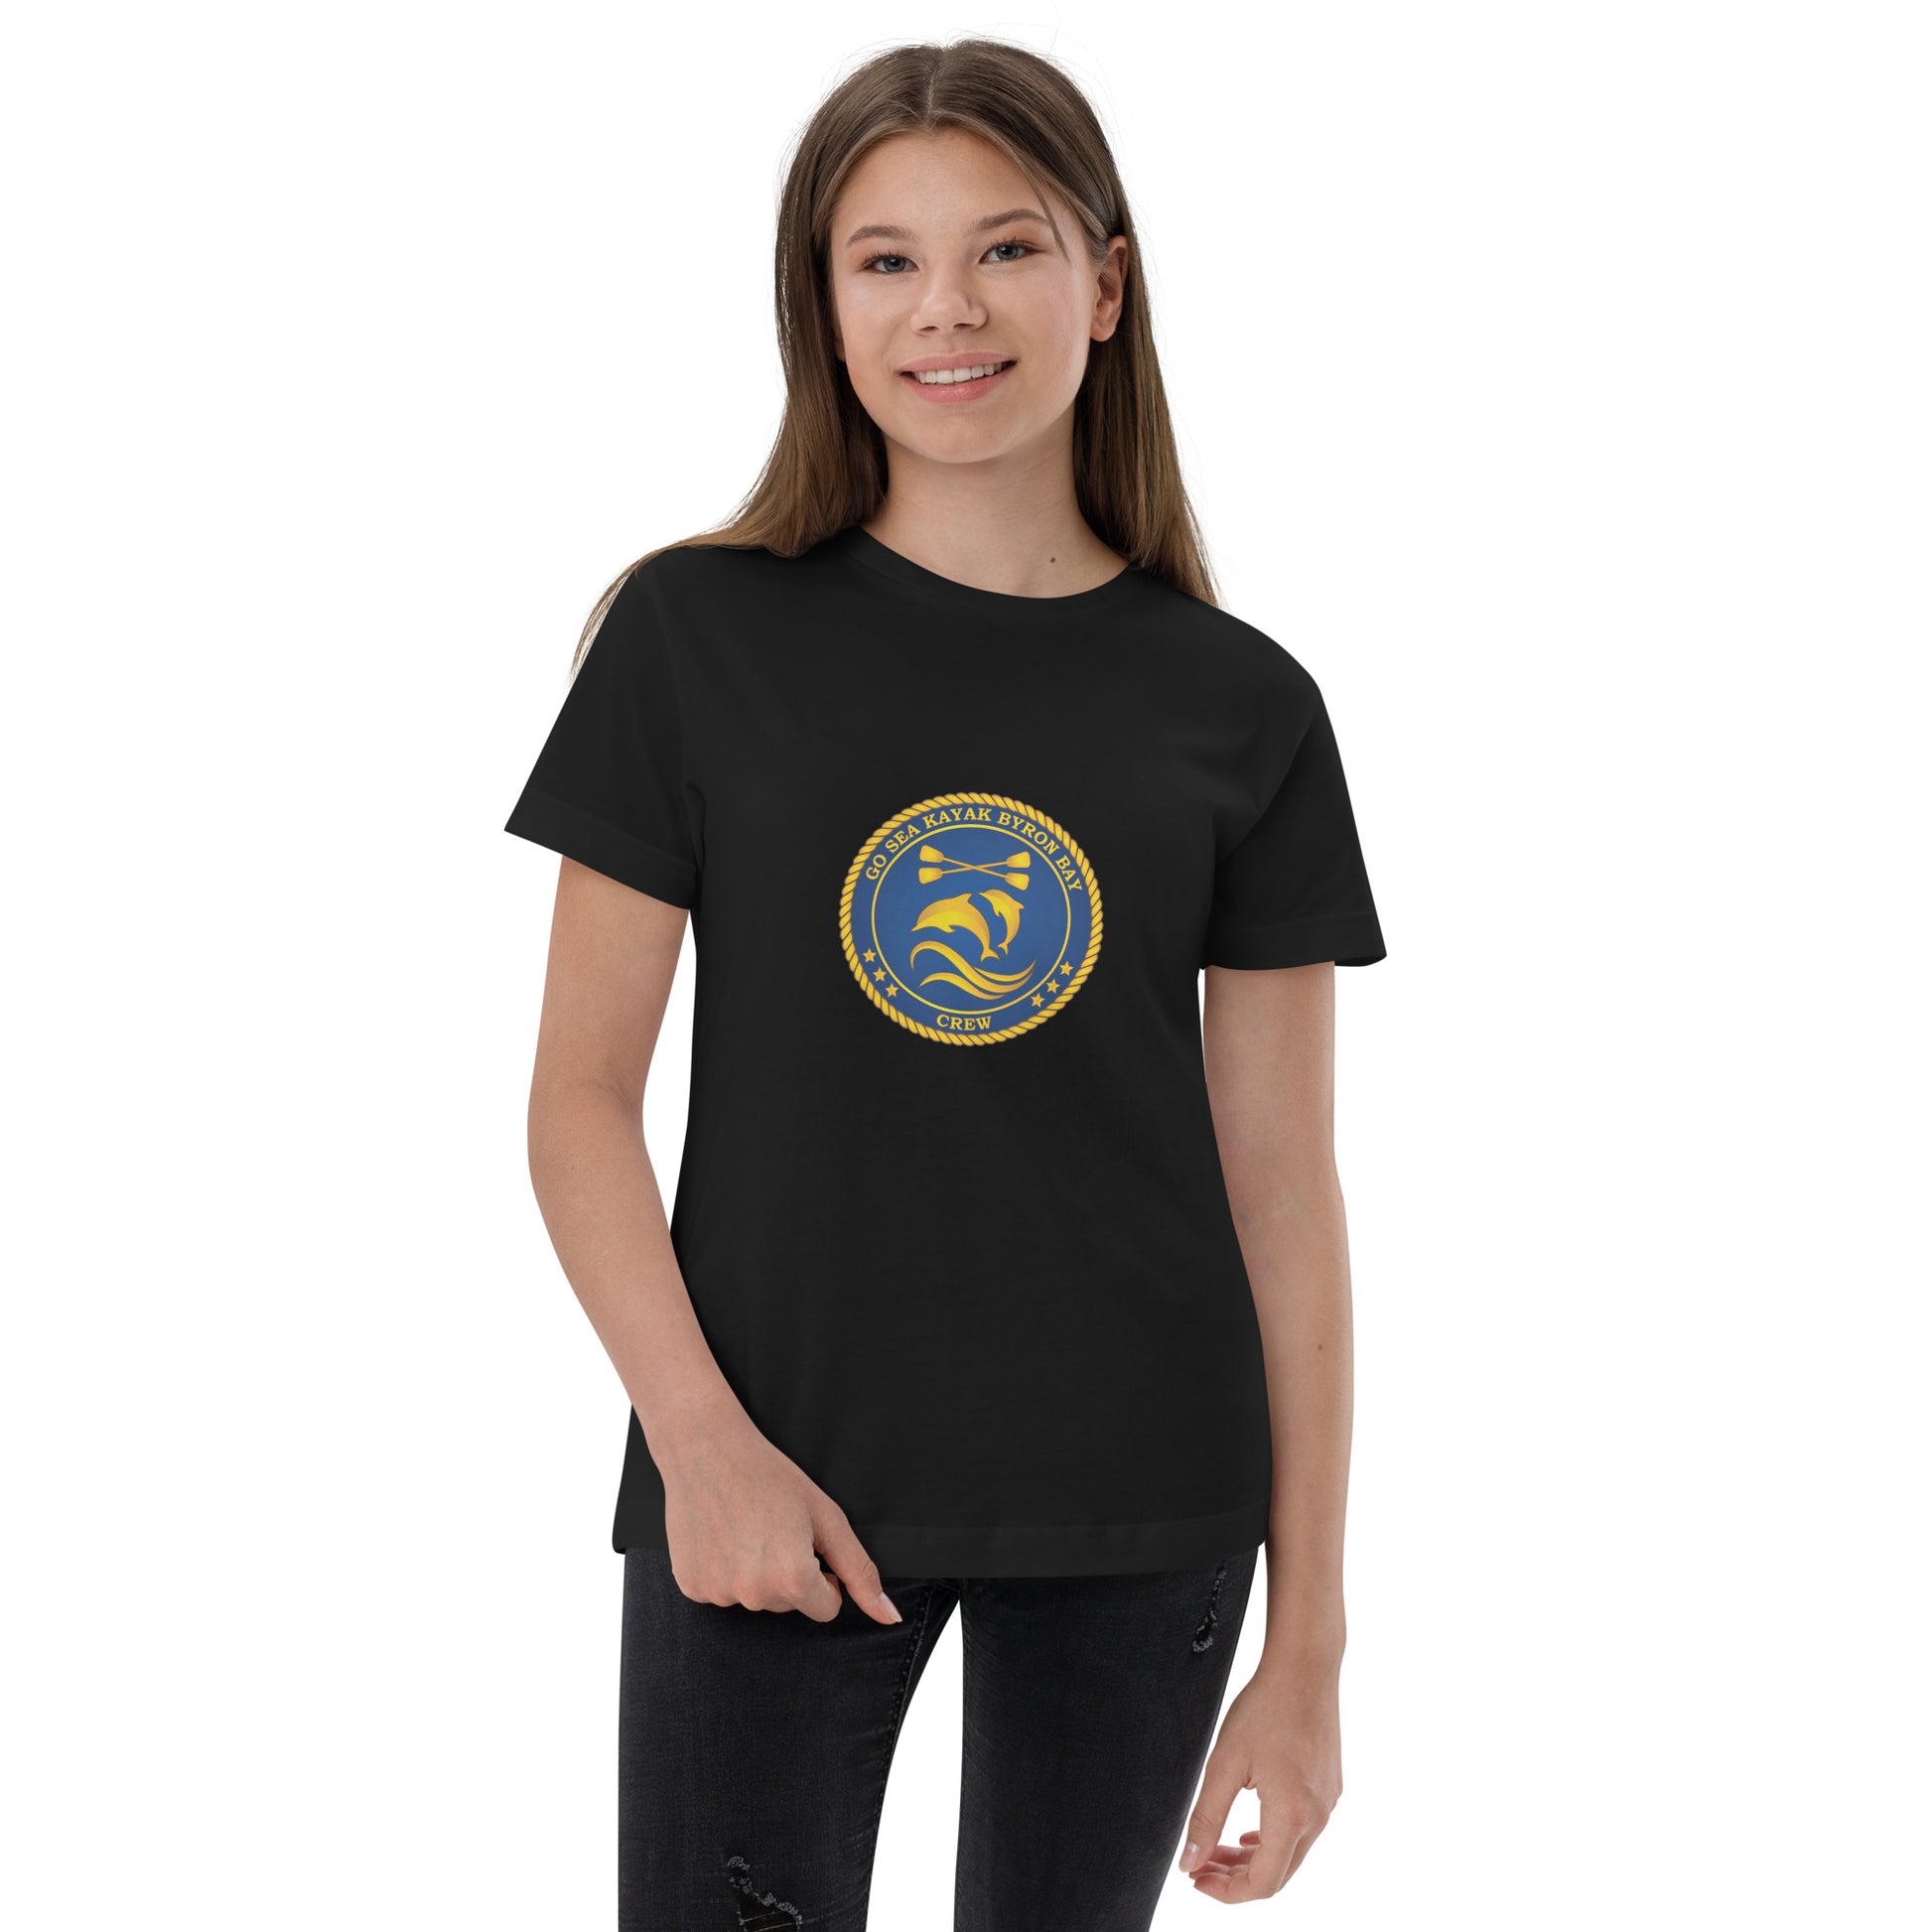  Kids T-Shirt - Black  - Front view, being warn on a girl standing with one hand grabing the bottom of the tee - Go Sea Kayak Byron Bay Crew (issue 2018-2019) logo on front - Genuine Byron Bay Merchandise | Produced by Go Sea Kayak Byron Bay 